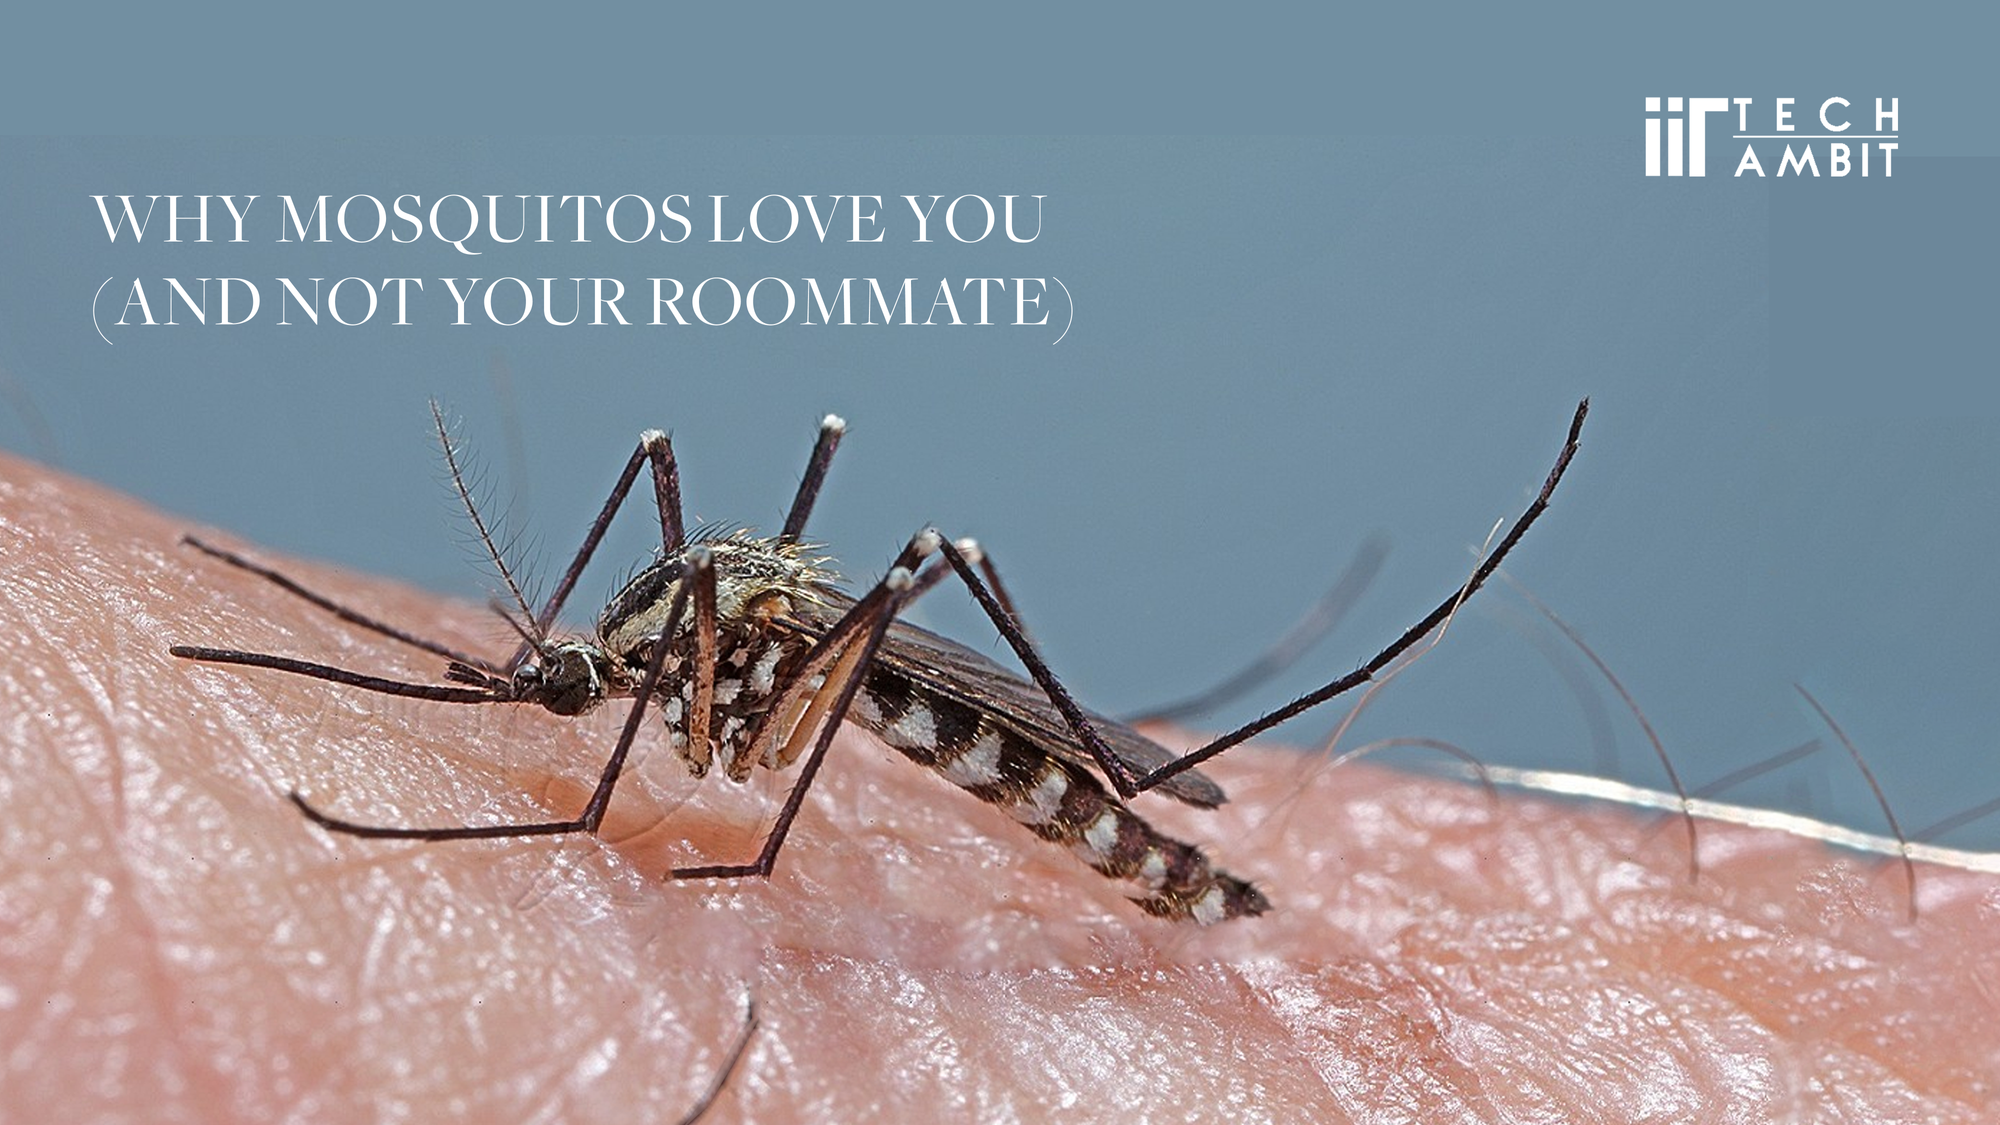 Why Mosquitos Love You (And Not Your Roommate)